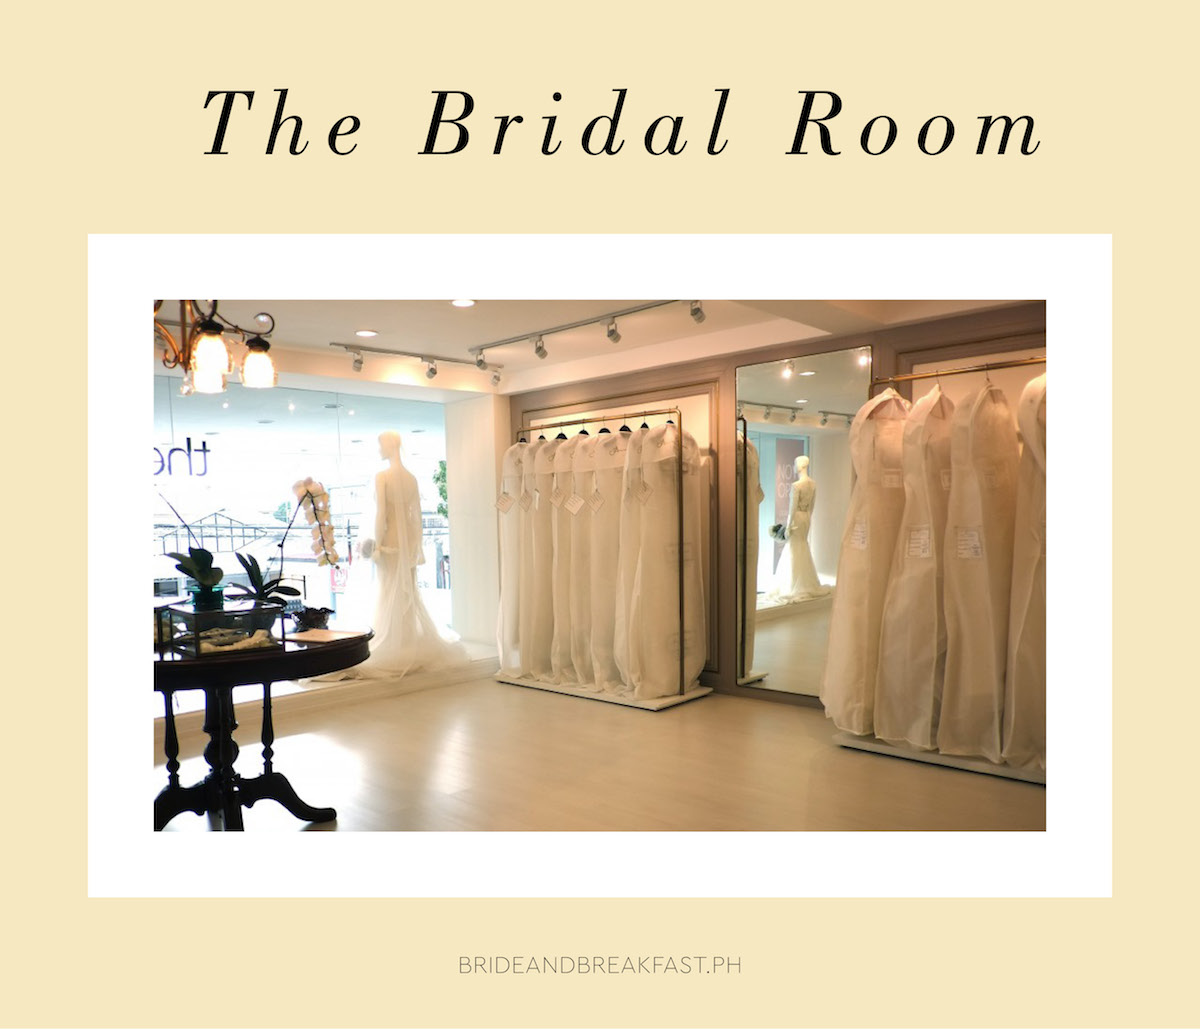 The Bridal Room